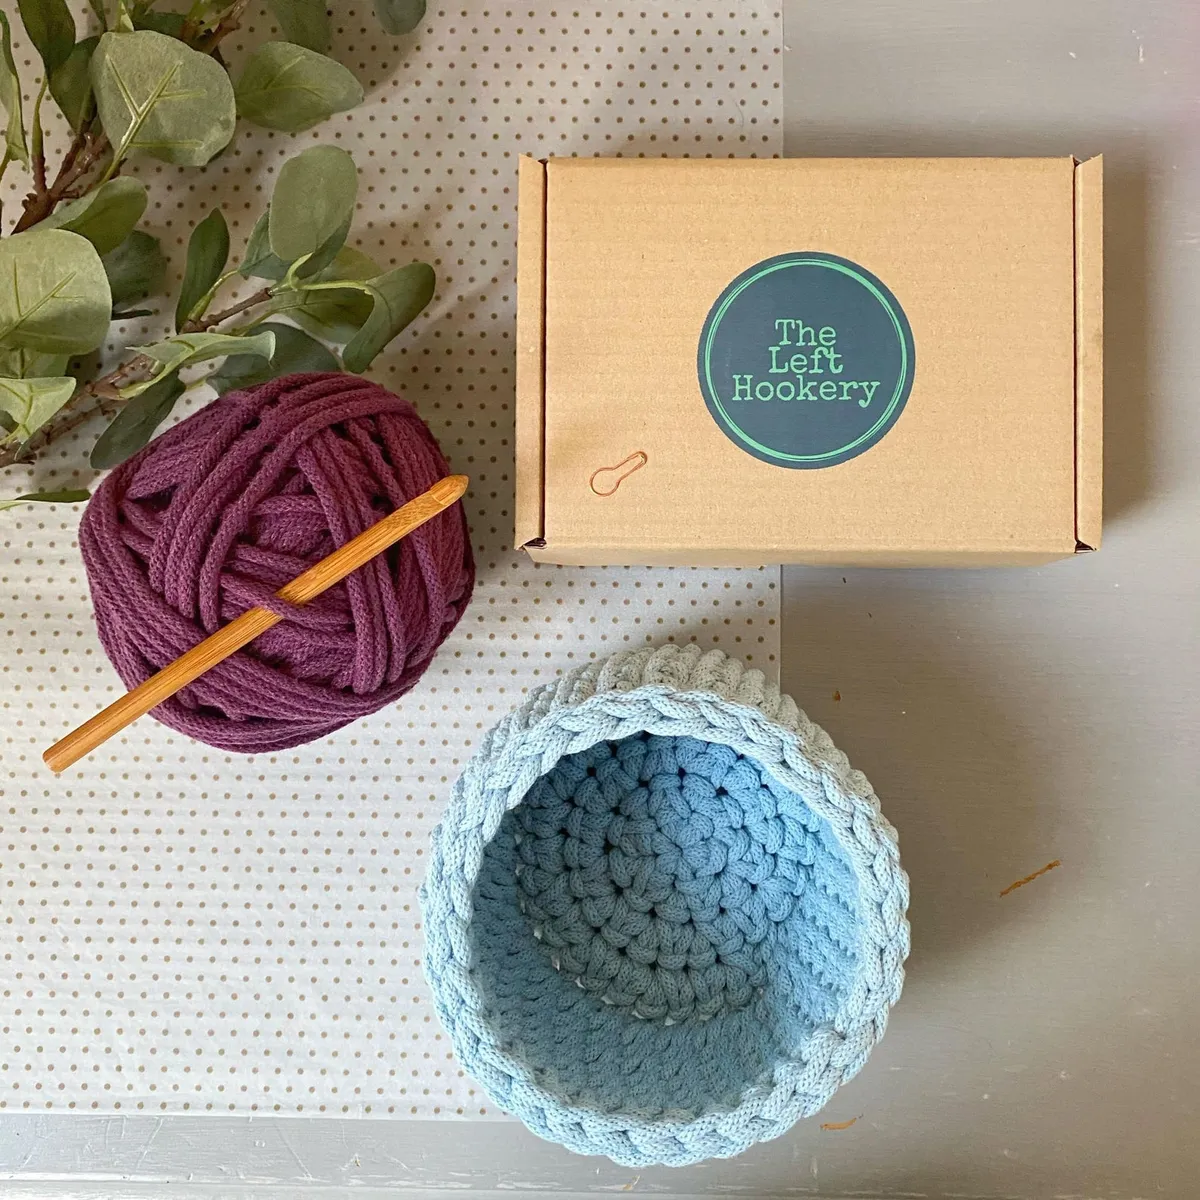 Small Crochet Basket craft Kit for adults